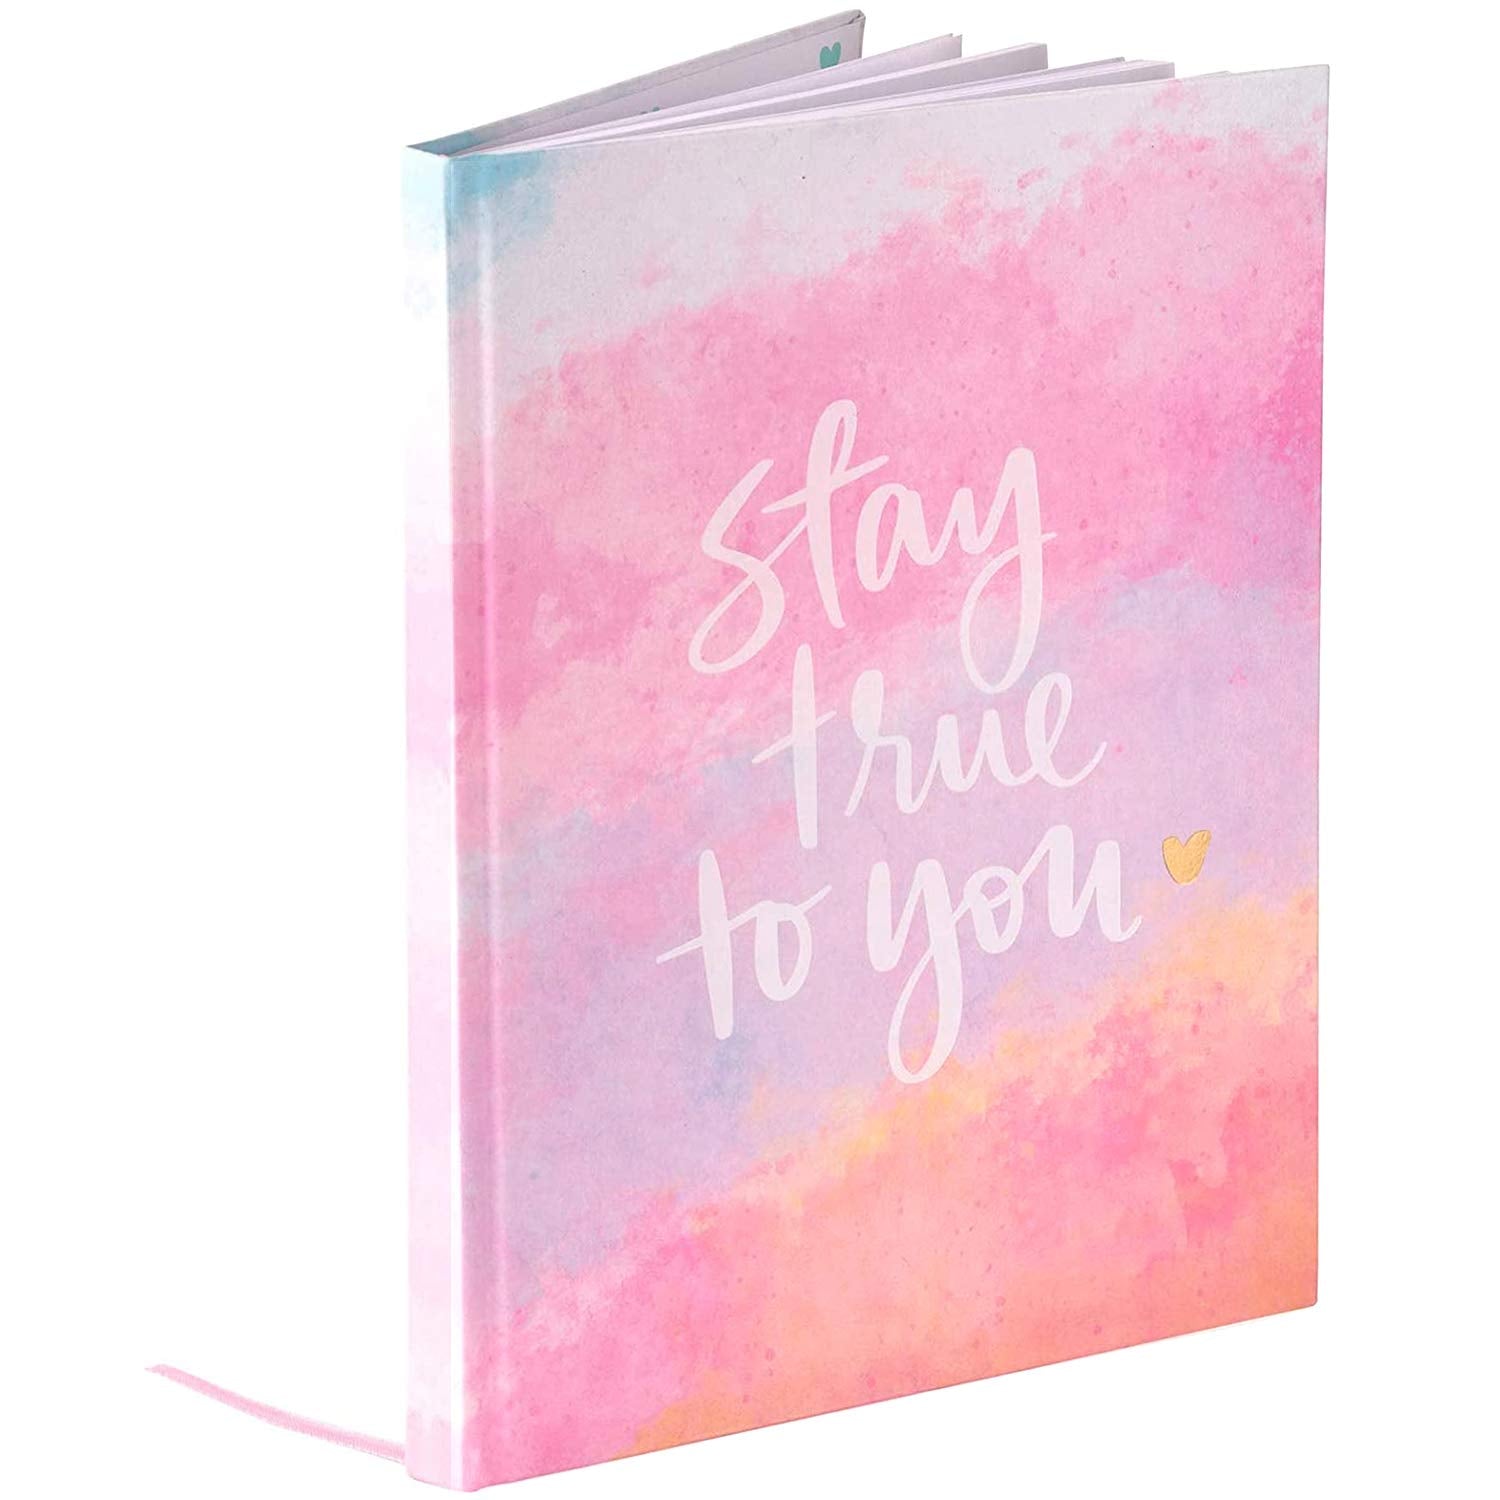 8x10 Hardcover Journal Eccolo Dayna Lee Collection